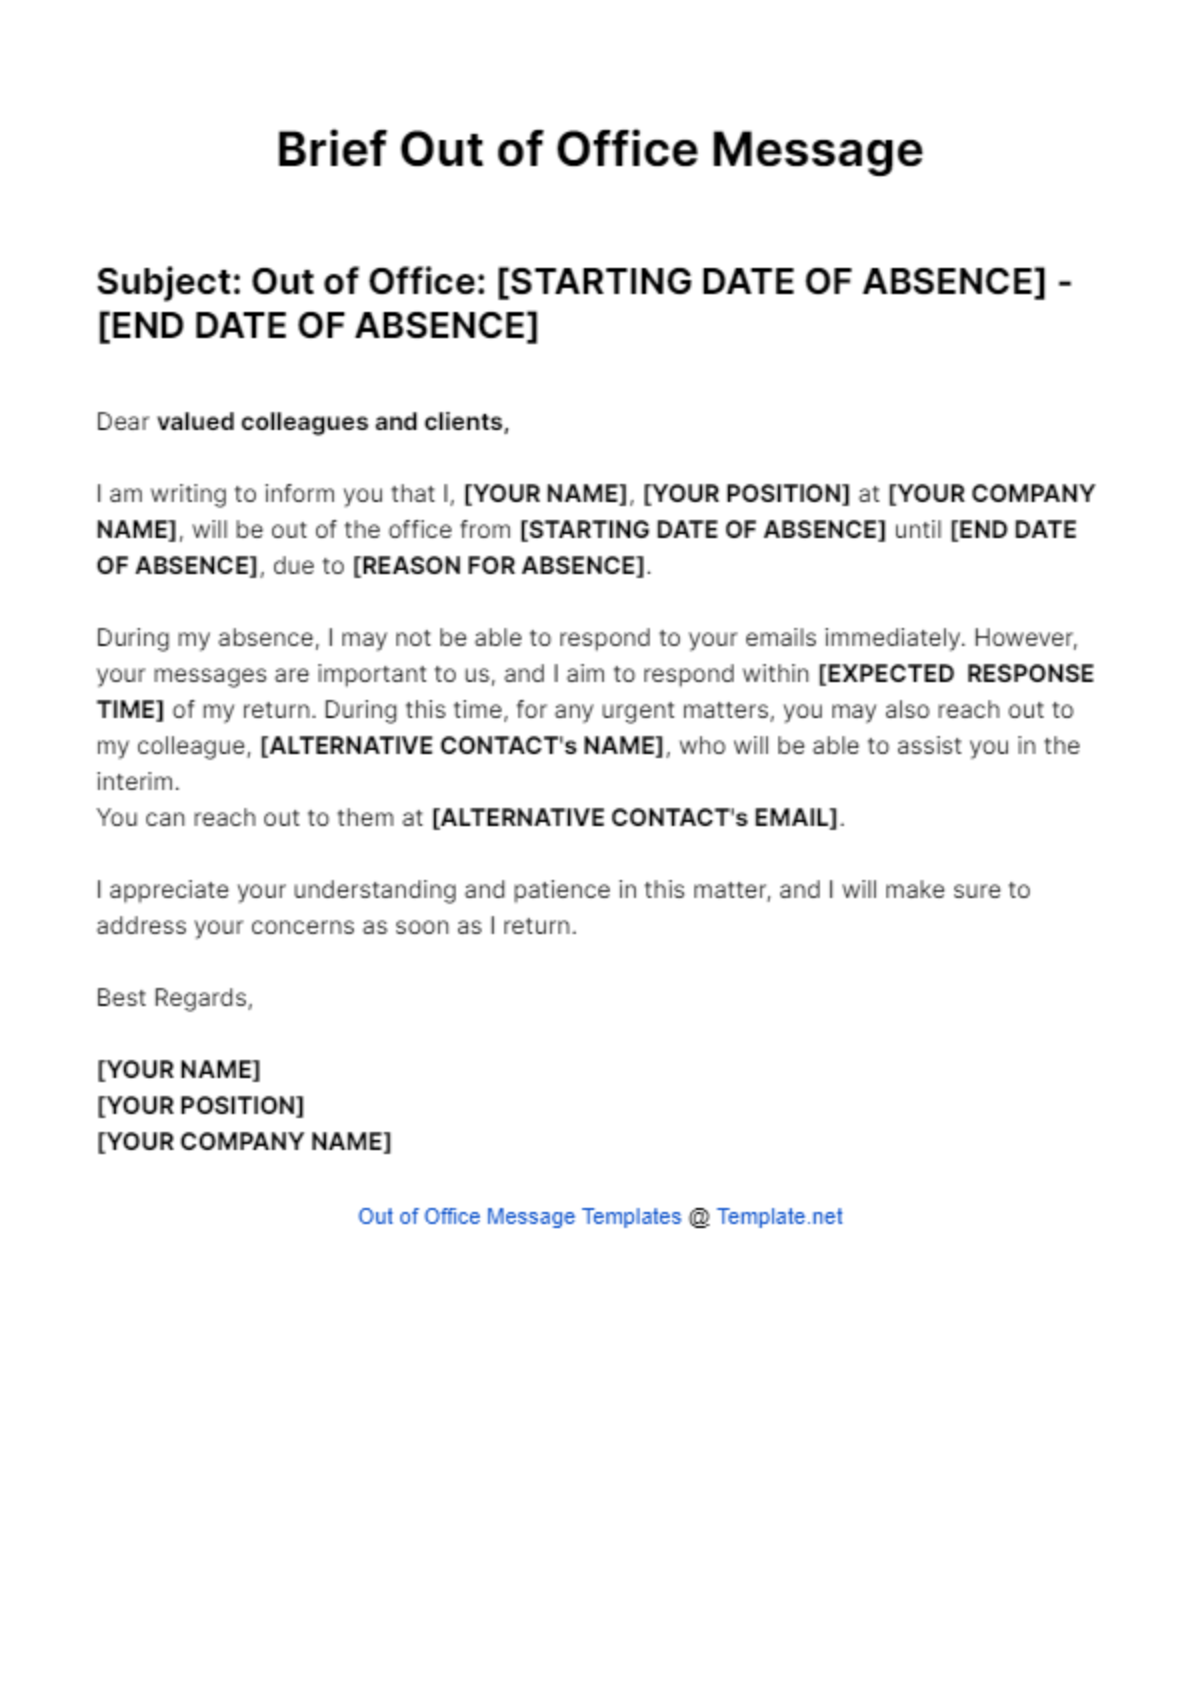 Brief Out Of Office Message Template